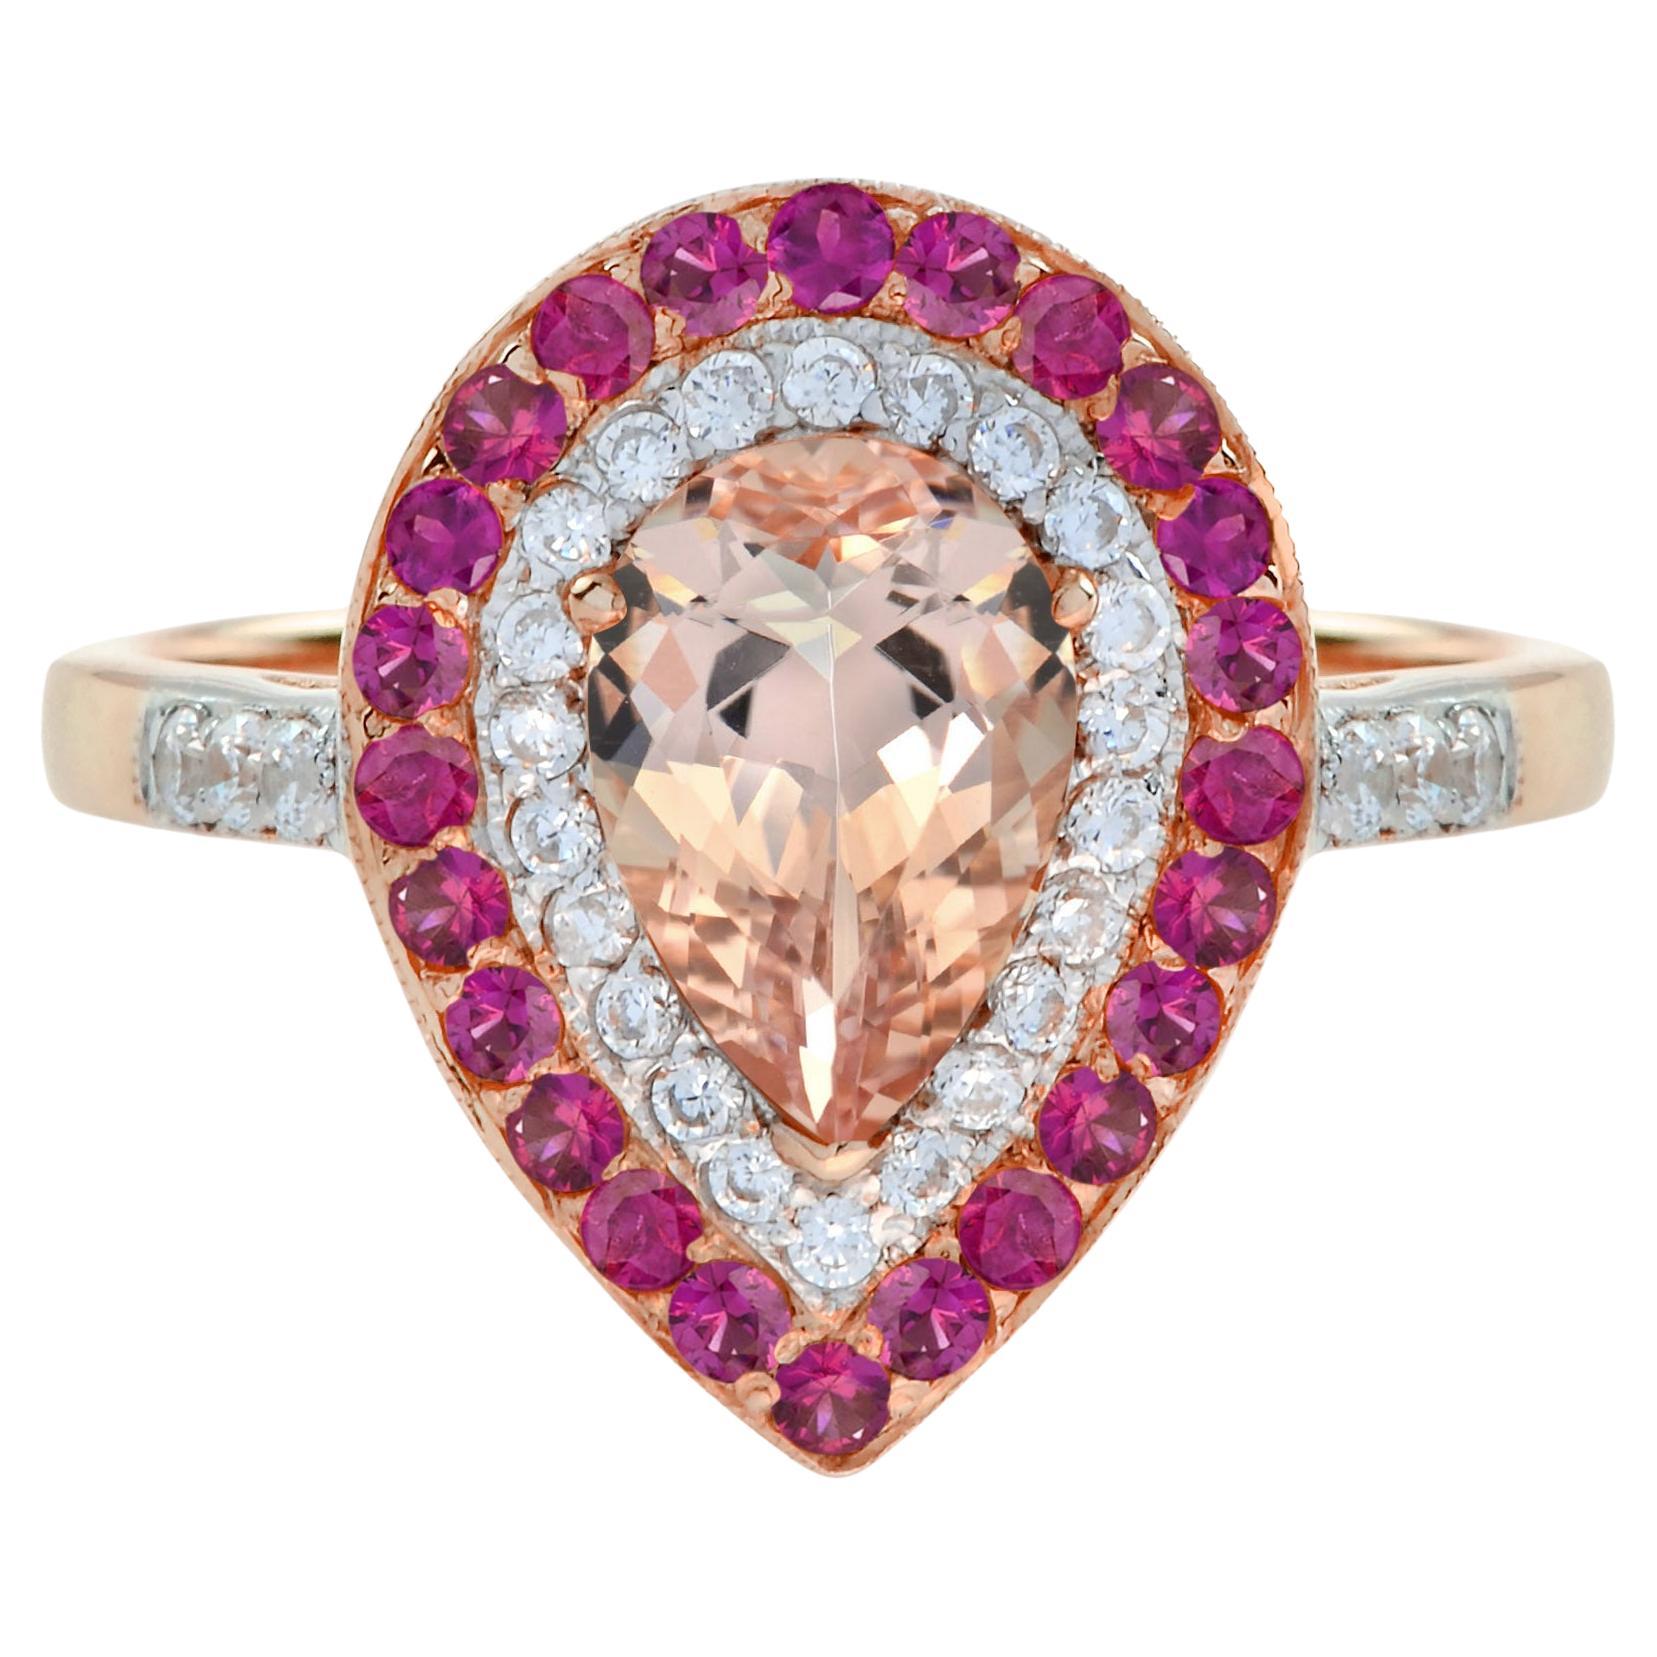 Morganite Diamond Ruby Pear Shaped Halo  Engagement Ring in 14K Rose Gold